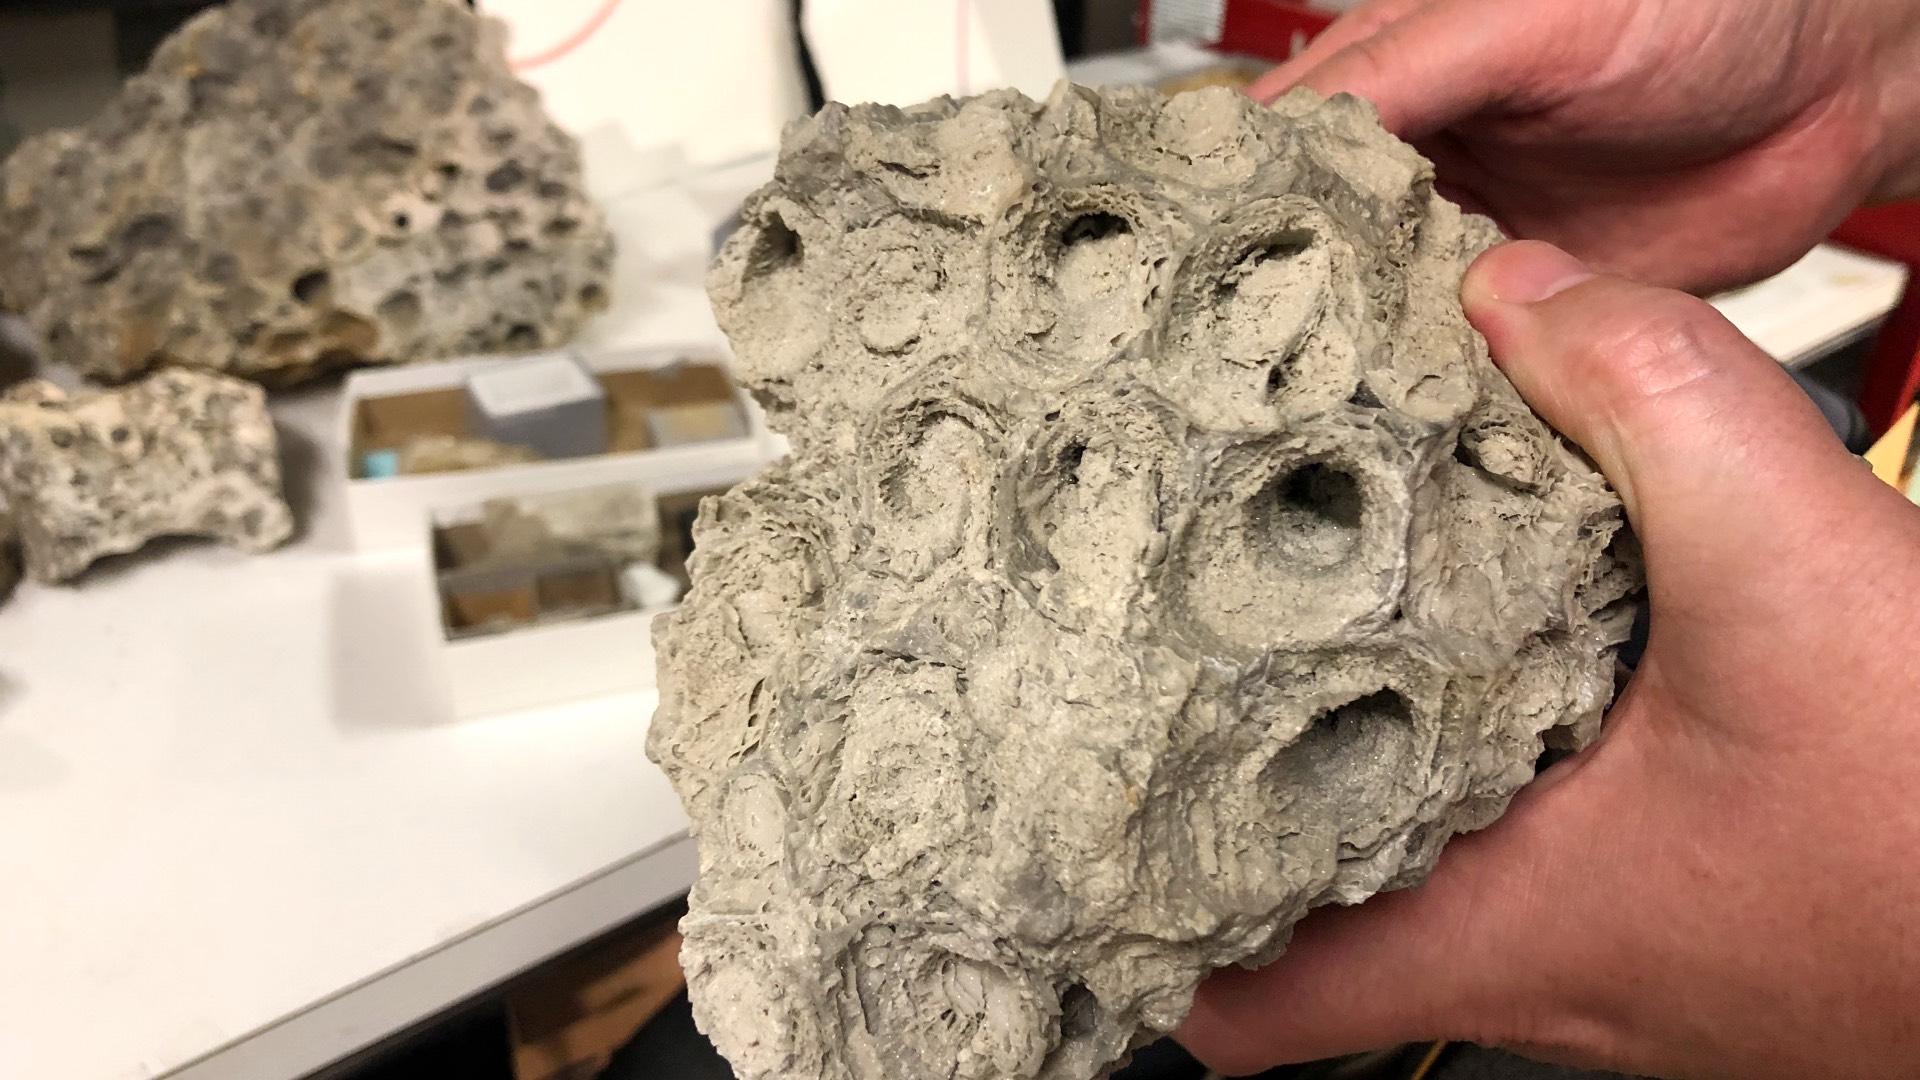 Dolostone Silurian reef fossil, from Thornton Quarry, in the Field Museum's collection. (Patty Wetli / WTTW News)